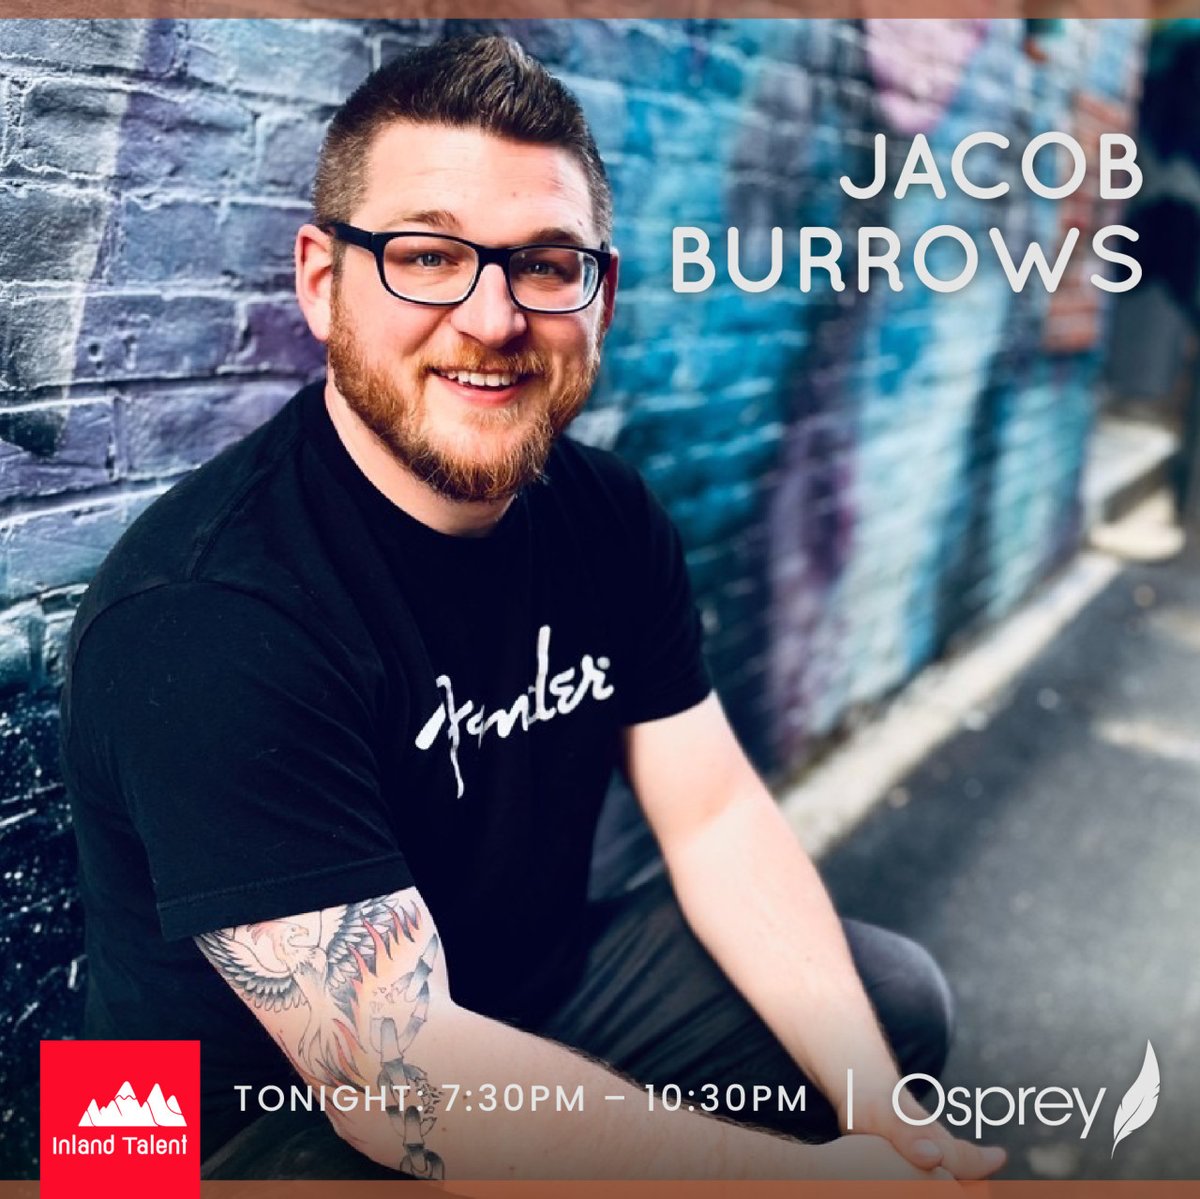 We've got a new singer in the line-up! Jacob Burrows performs AND teaches music. We are so excited to have him here at the Osprey for the first time 🎶
#livemusic #spokanemusic #spokaneevents #spokane